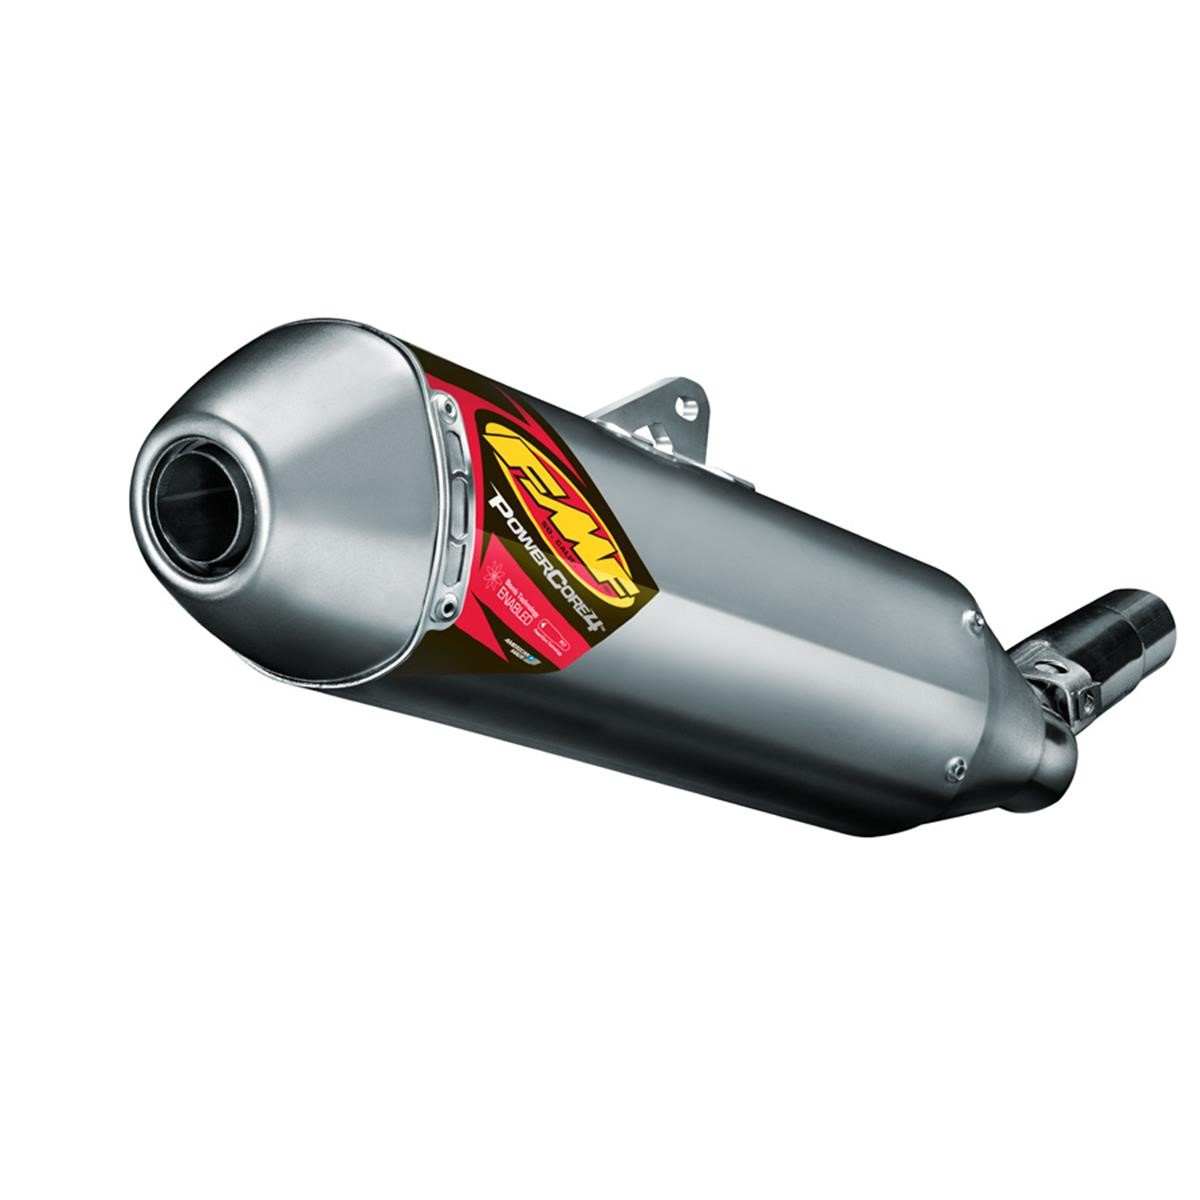 FMF Silencieux PowerCore 4 Hex Stainless steel/Aluminium/Stainless steel, Yamaha YZF 450 12-14